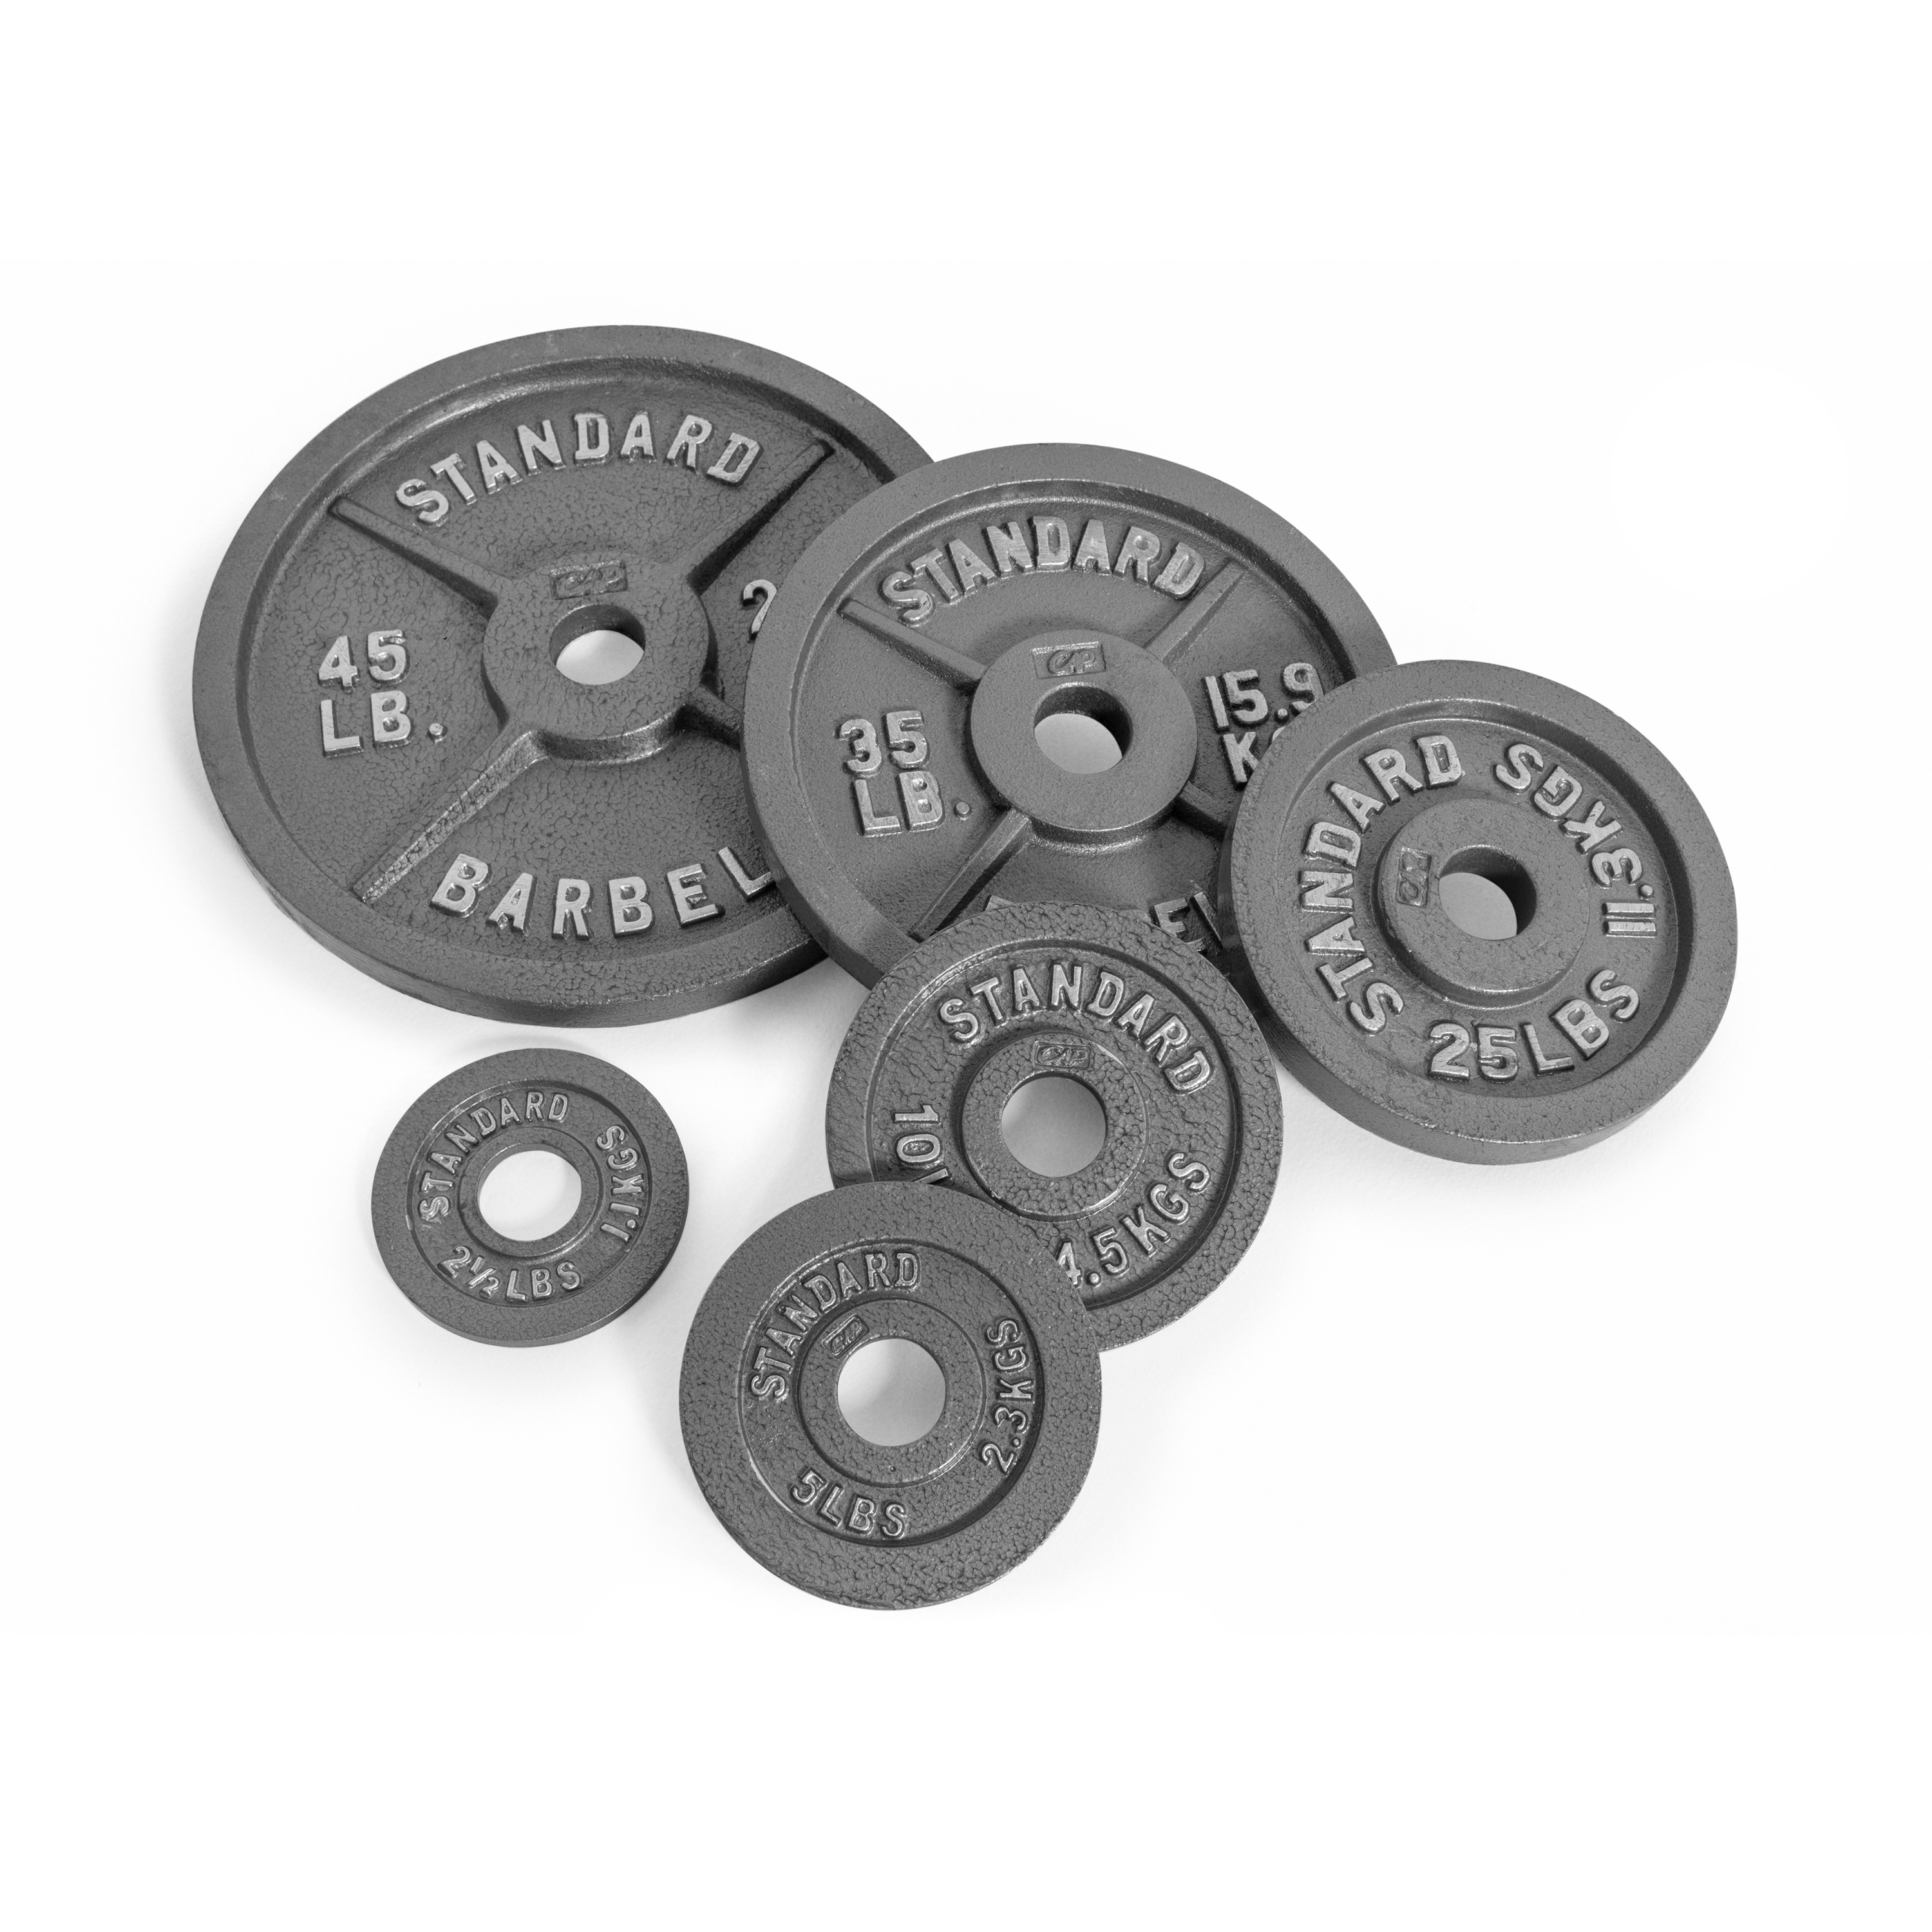 CAP Barbell Gray Olympic Cast Iron Weight Plate, 5 lb - image 2 of 2